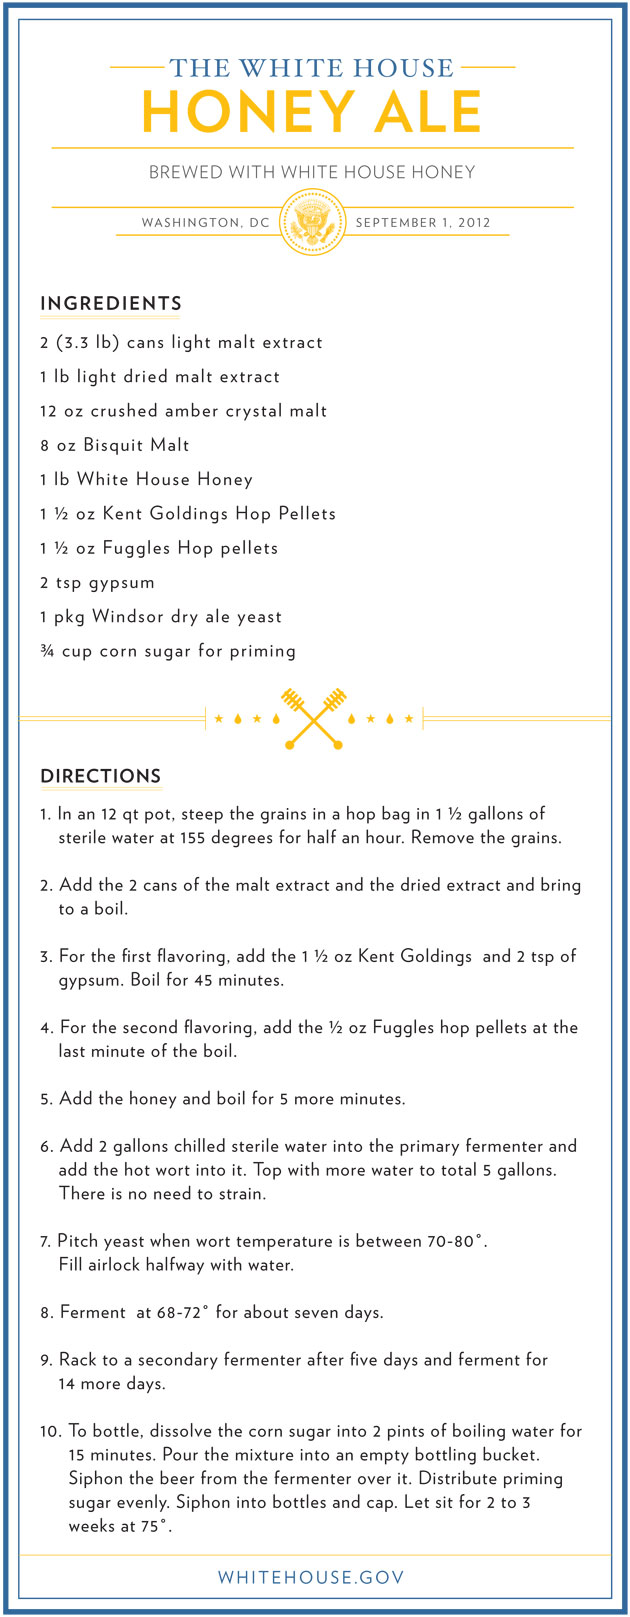 official White House Honey Ale beer recipe